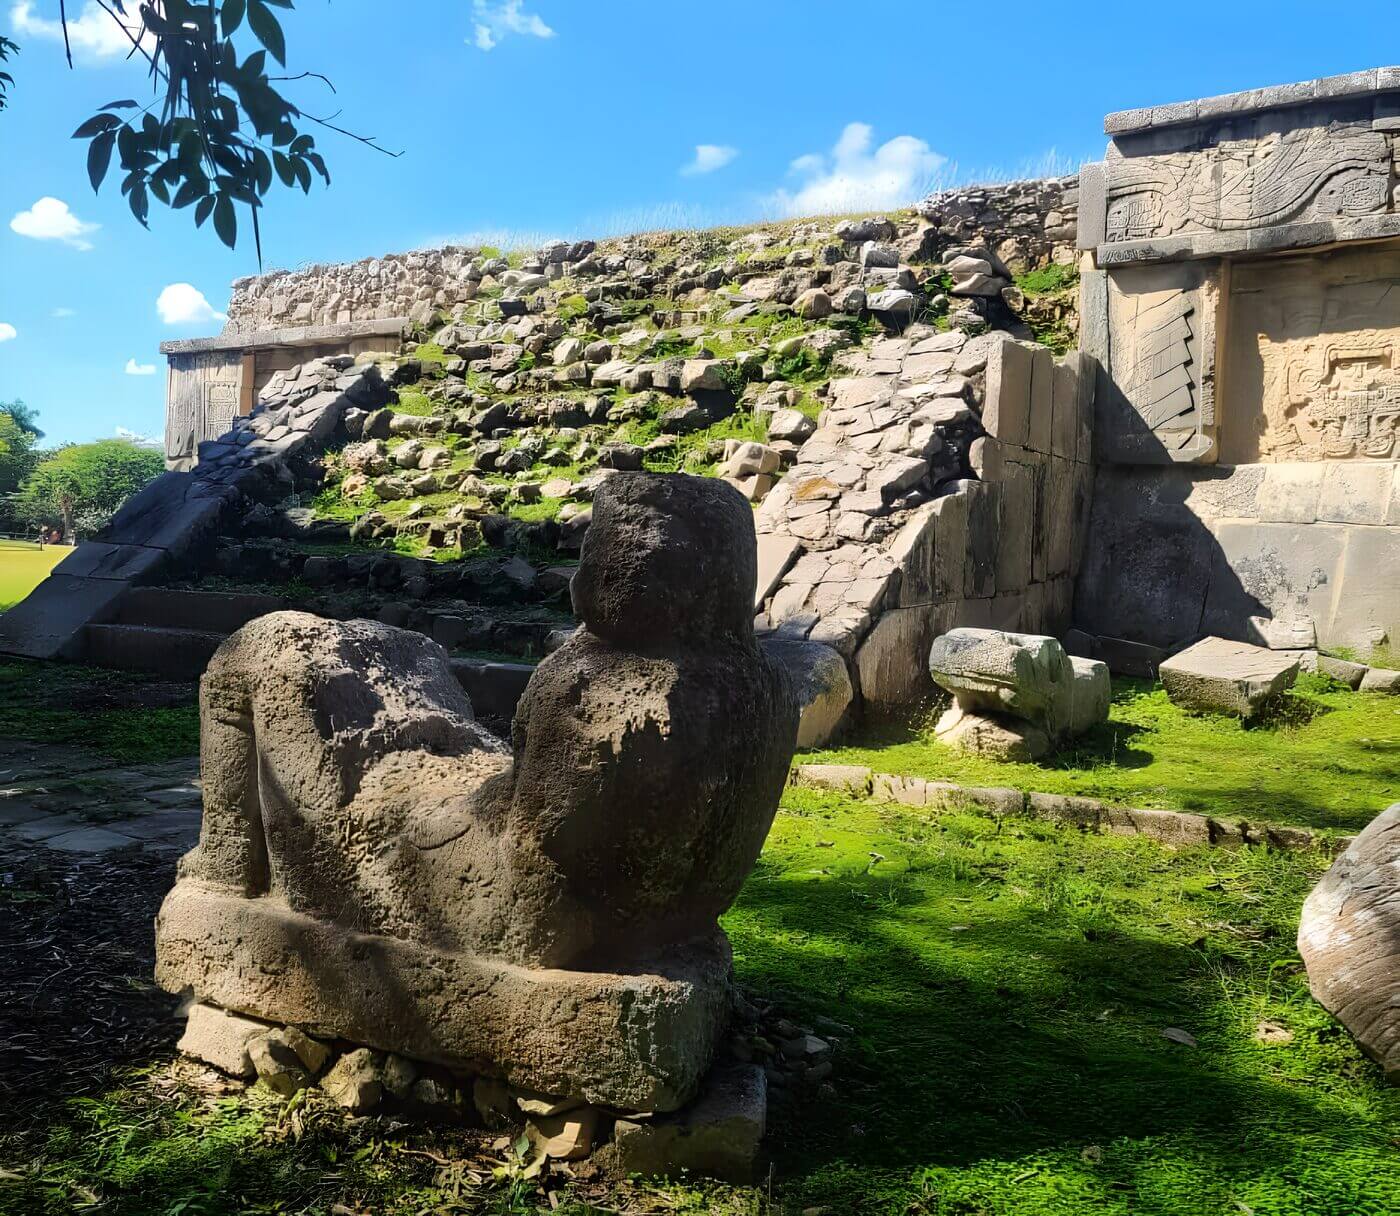 A large stone carving at the base of a partially collapsed ancient pyramid structure in Chichen Itza, Yucatan, Mexico, with green vegetation growing between the stones under a clear blue sky.